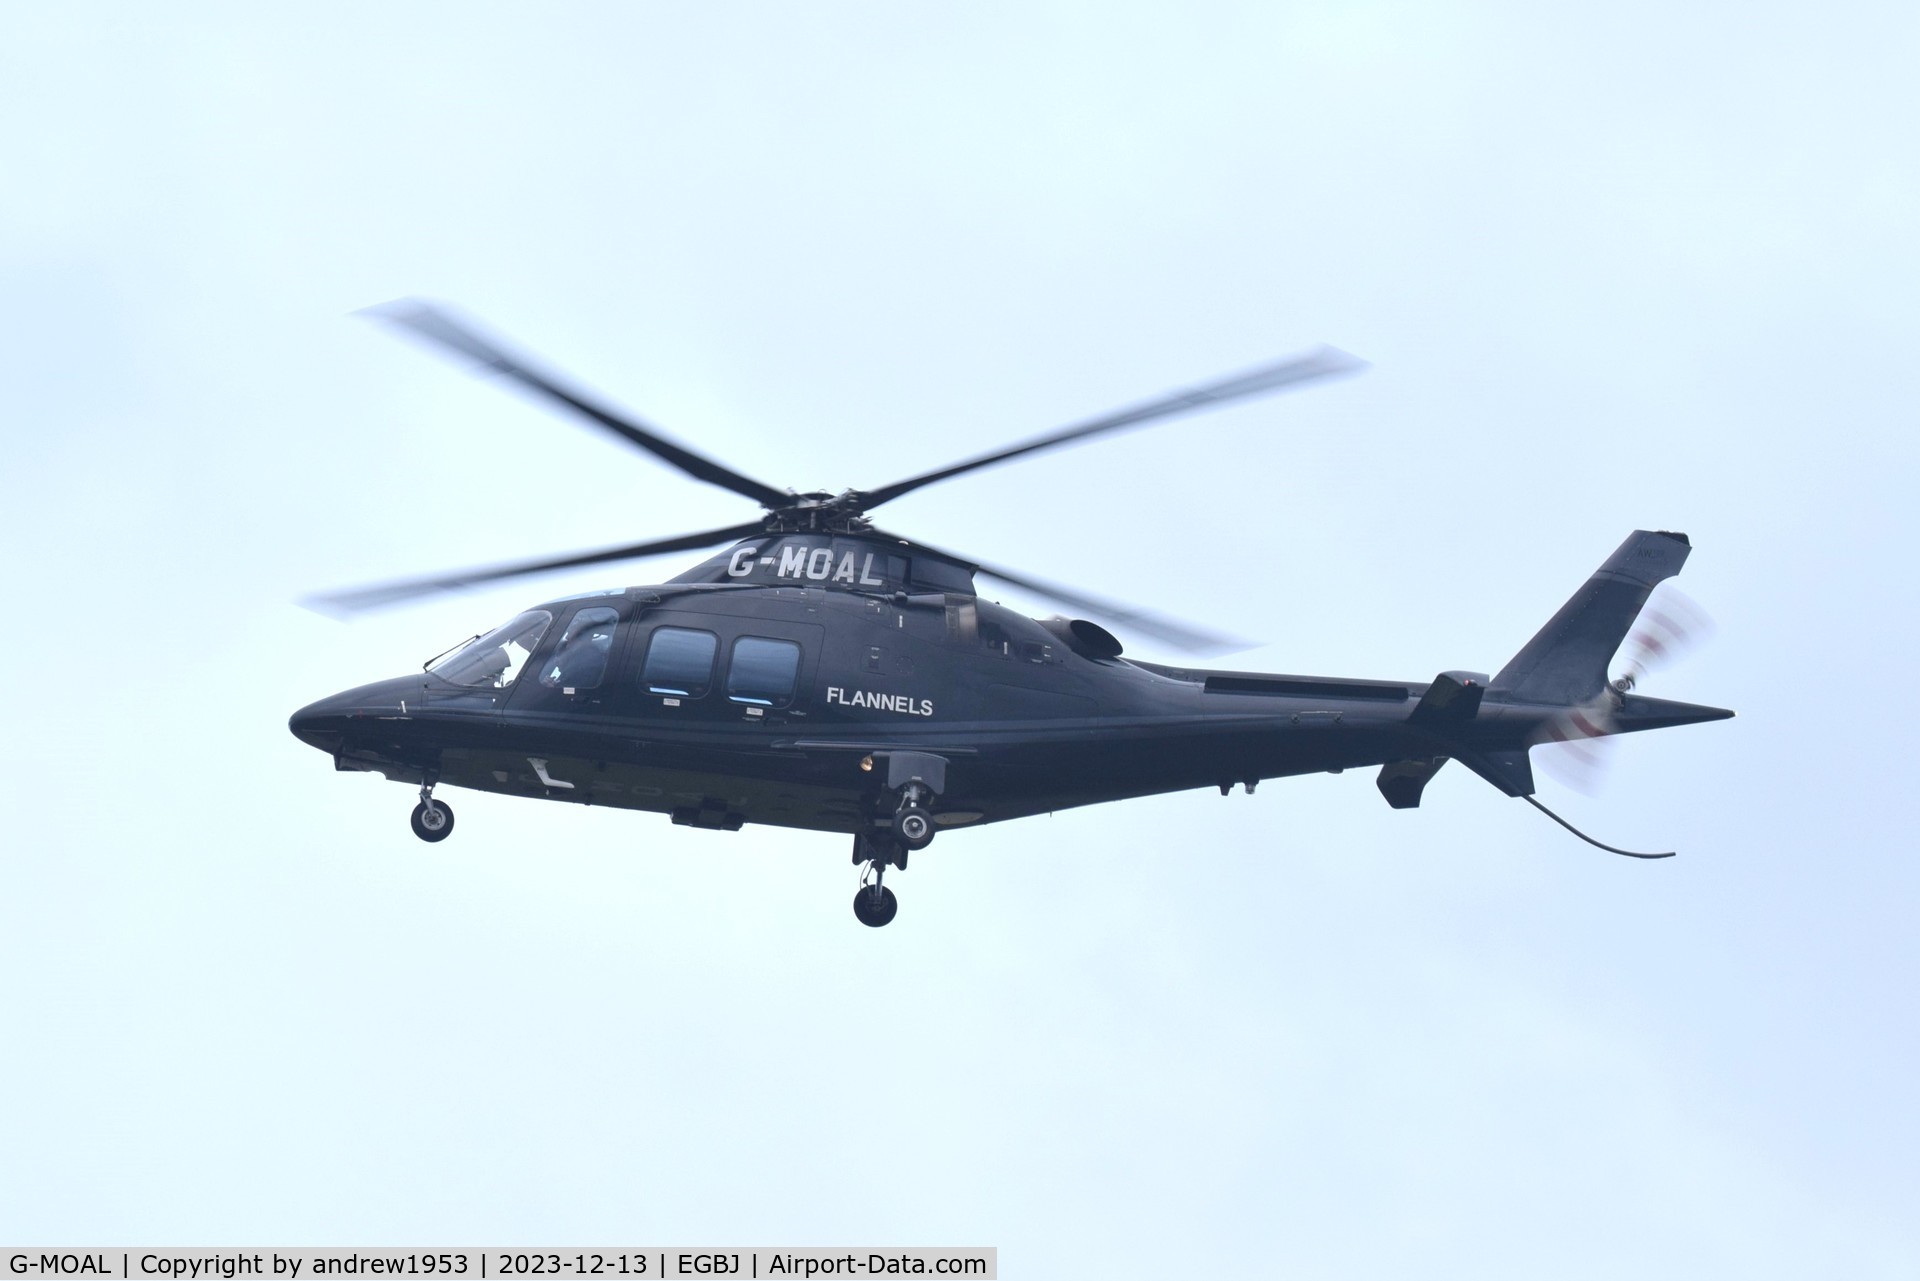 G-MOAL, 2015 AgustaWestland AW-109SP Grand New C/N 22348, G-MOAL at Gloucestershire Airport.